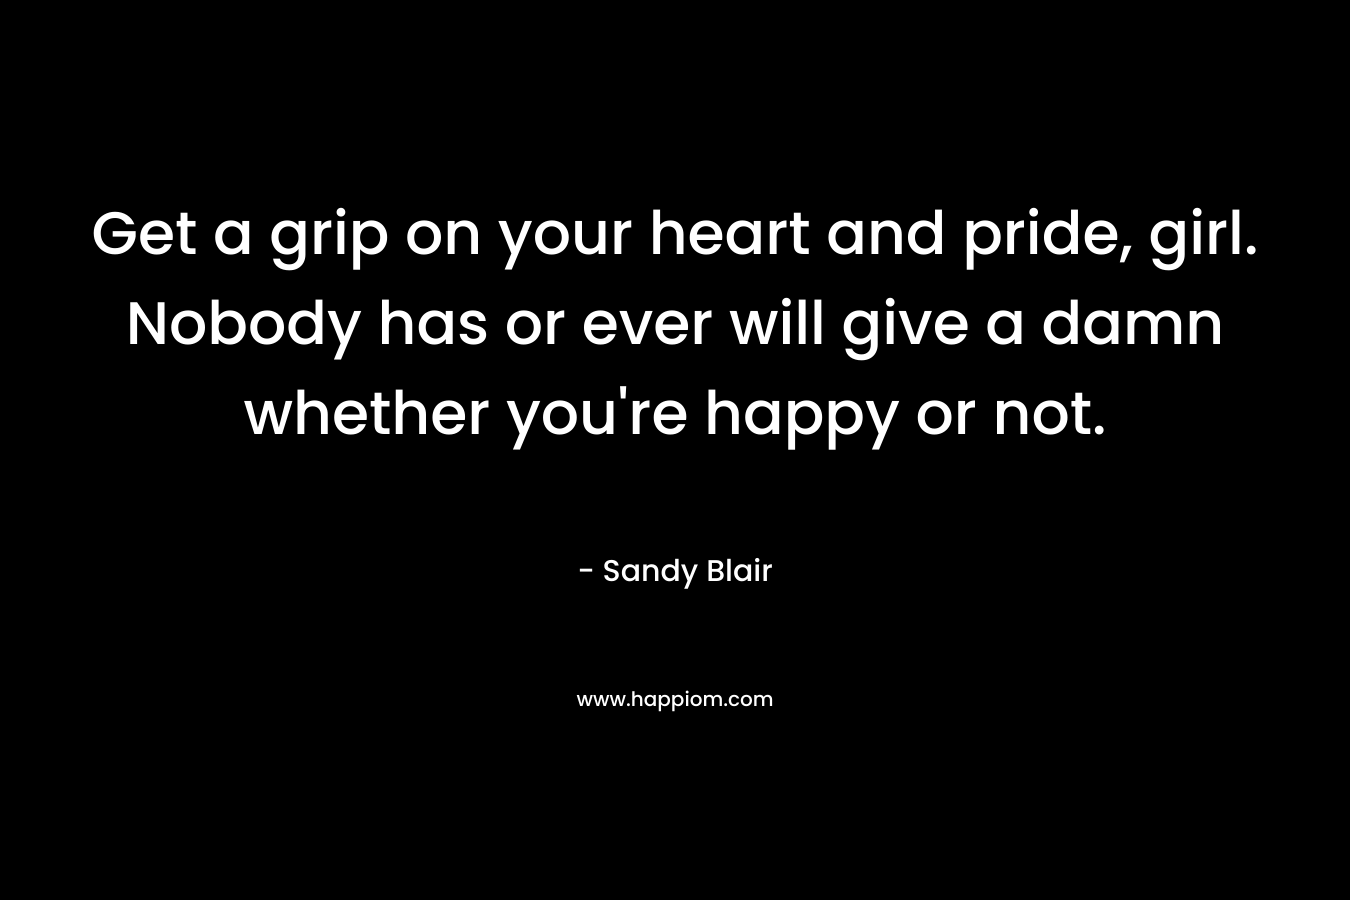 Get a grip on your heart and pride, girl. Nobody has or ever will give a damn whether you're happy or not.